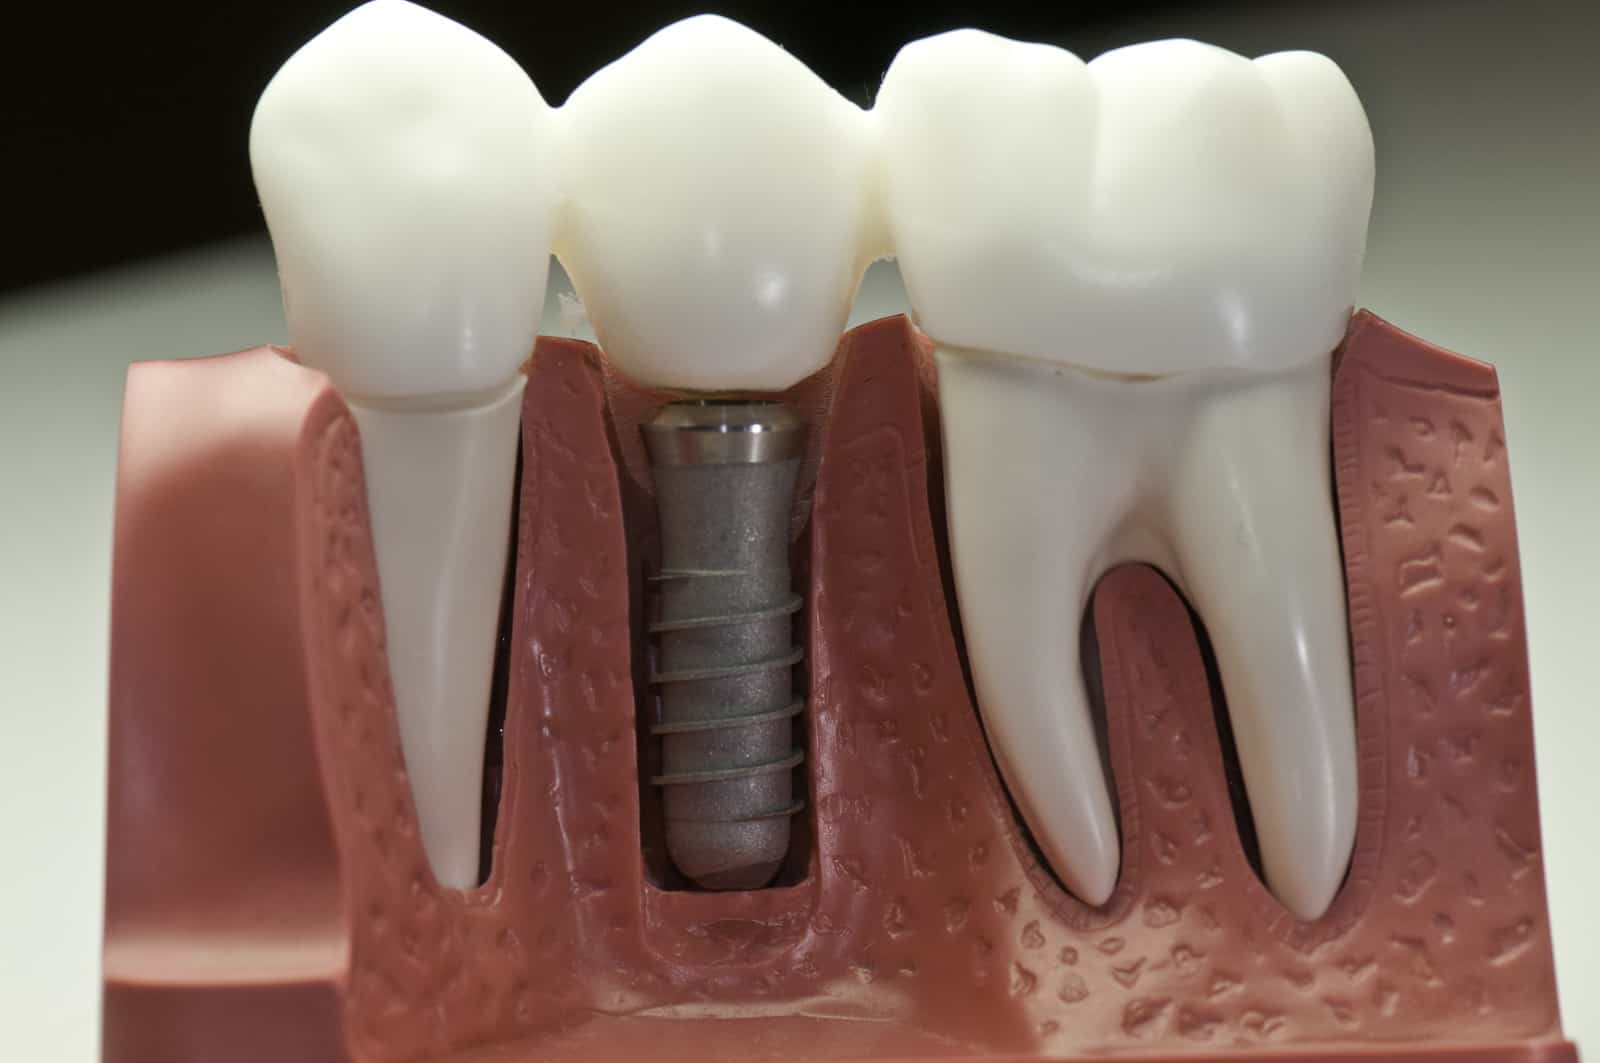 dental implants are permanent